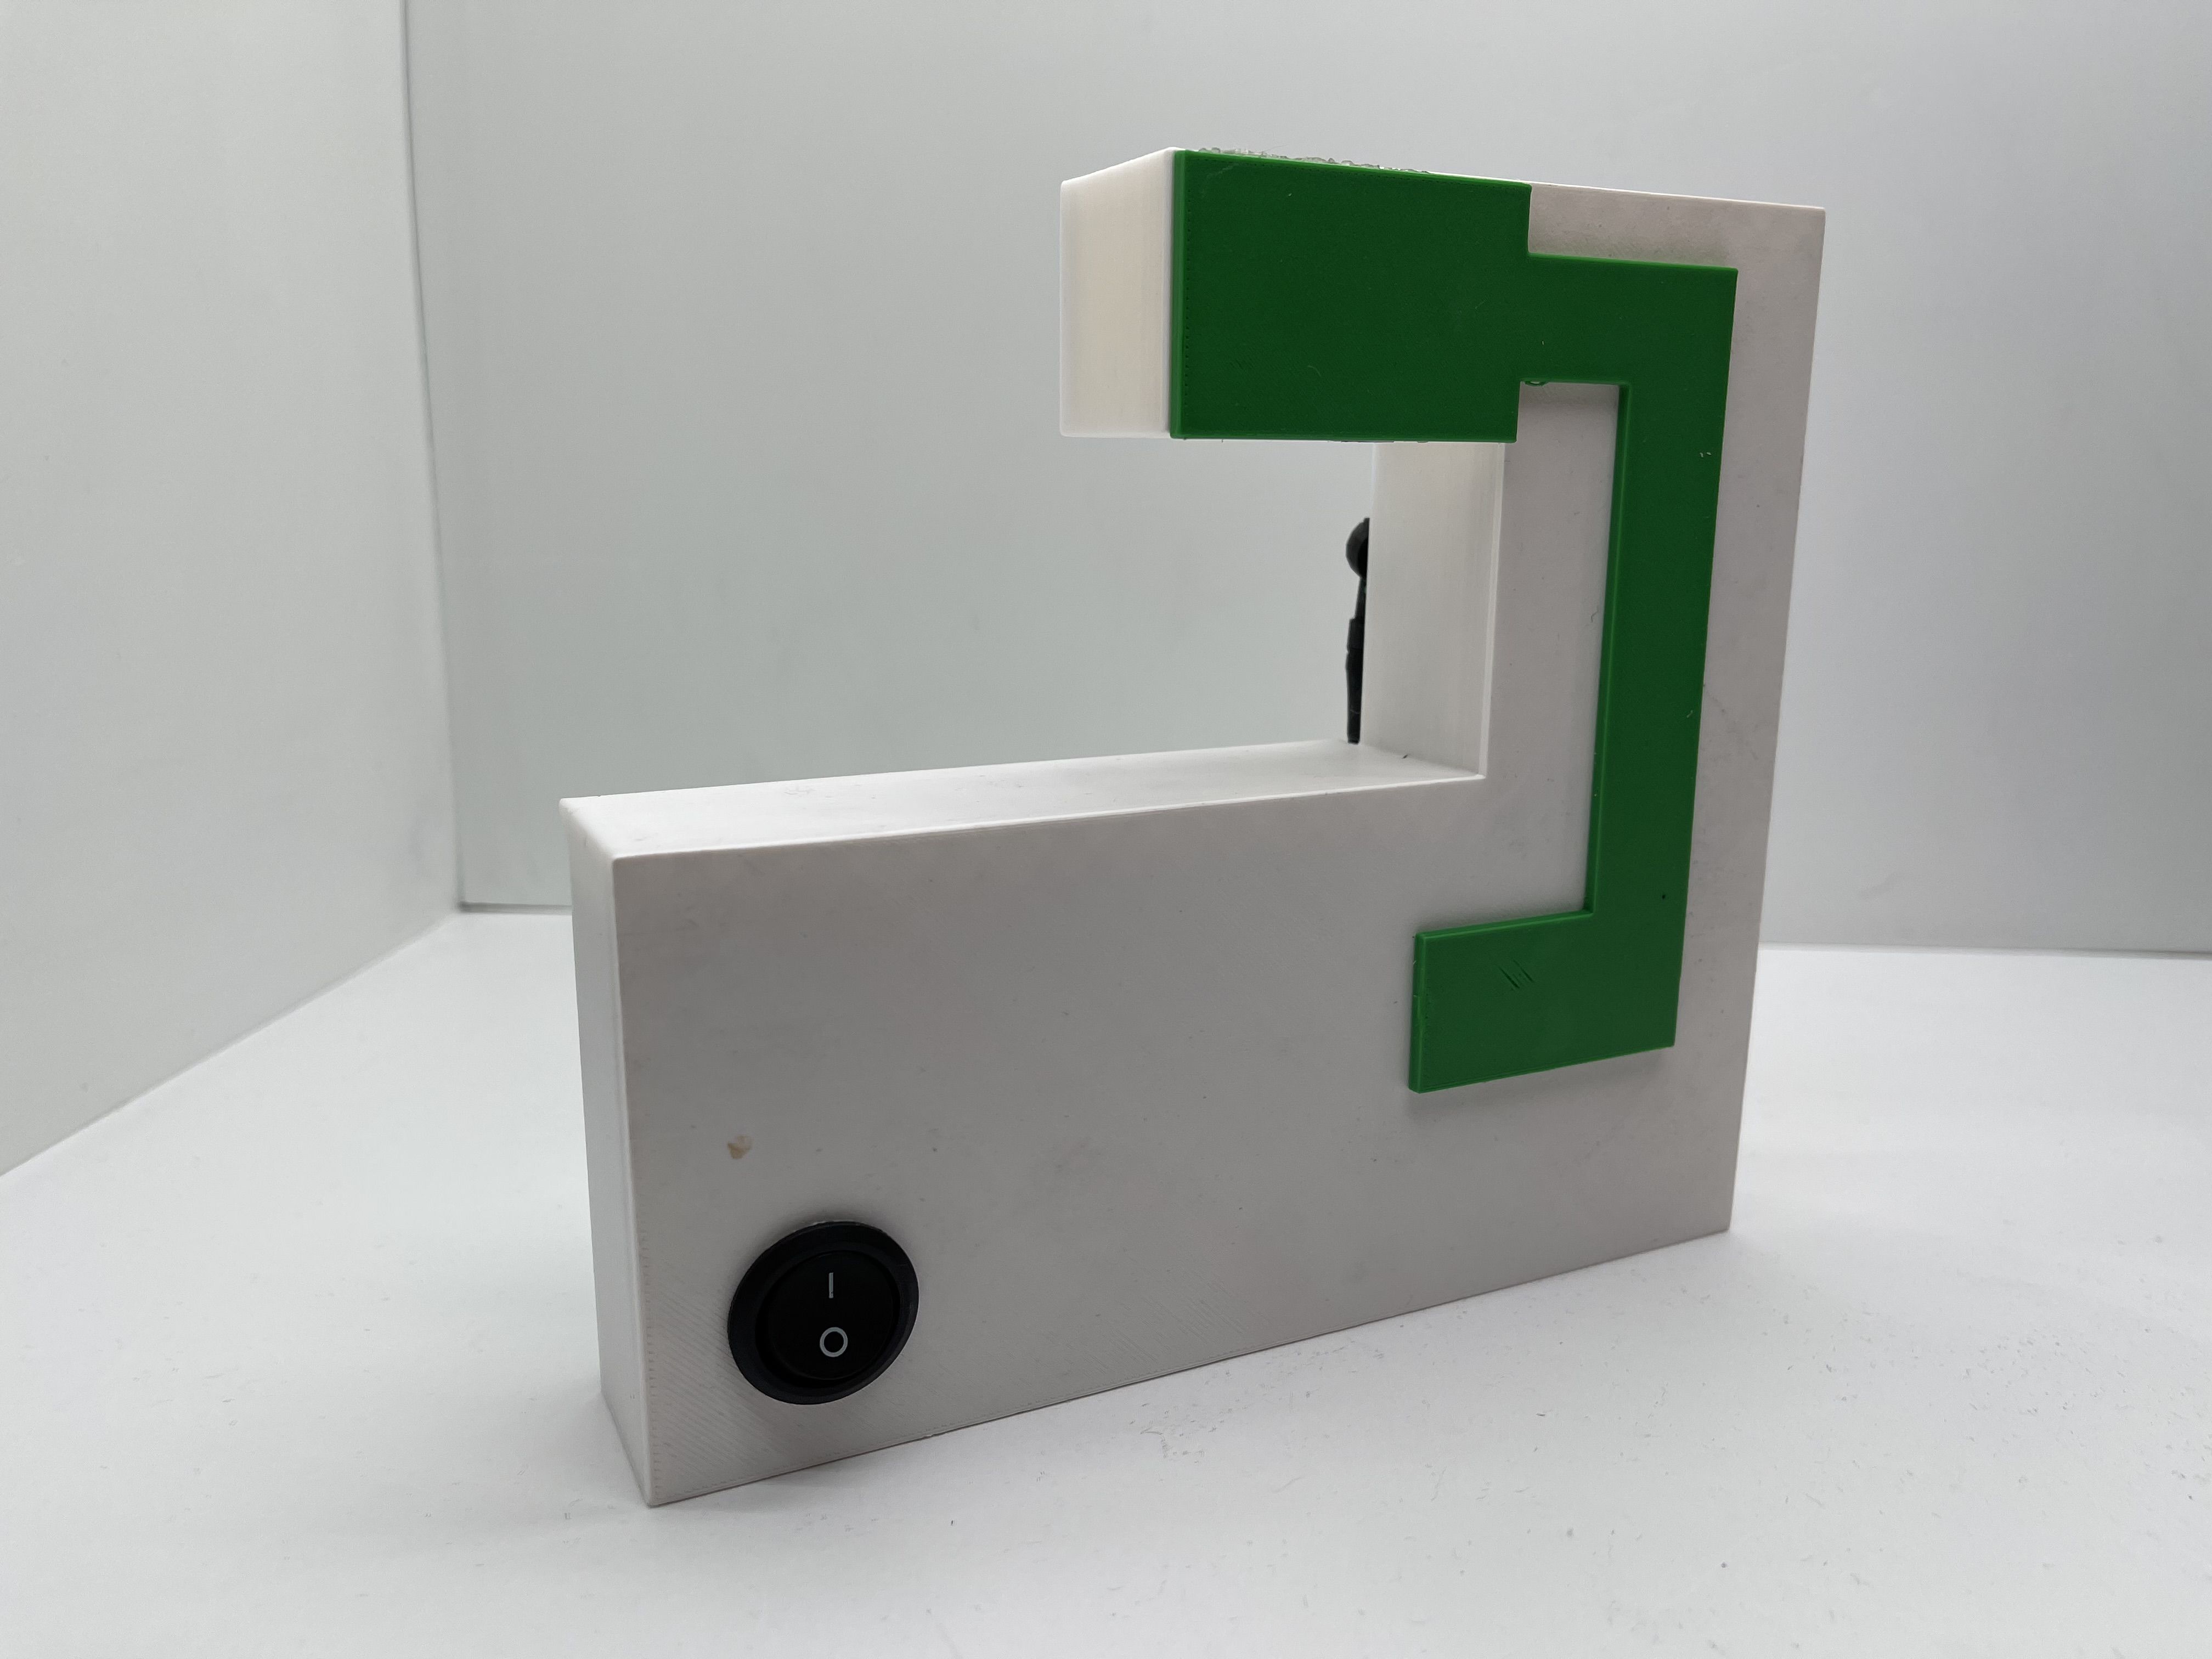 IMG-5259.jpg Download STL file SCALE GAS PUMP IN1/10 SCALE WITH LIGHT • 3D printing object, Darek3dprint